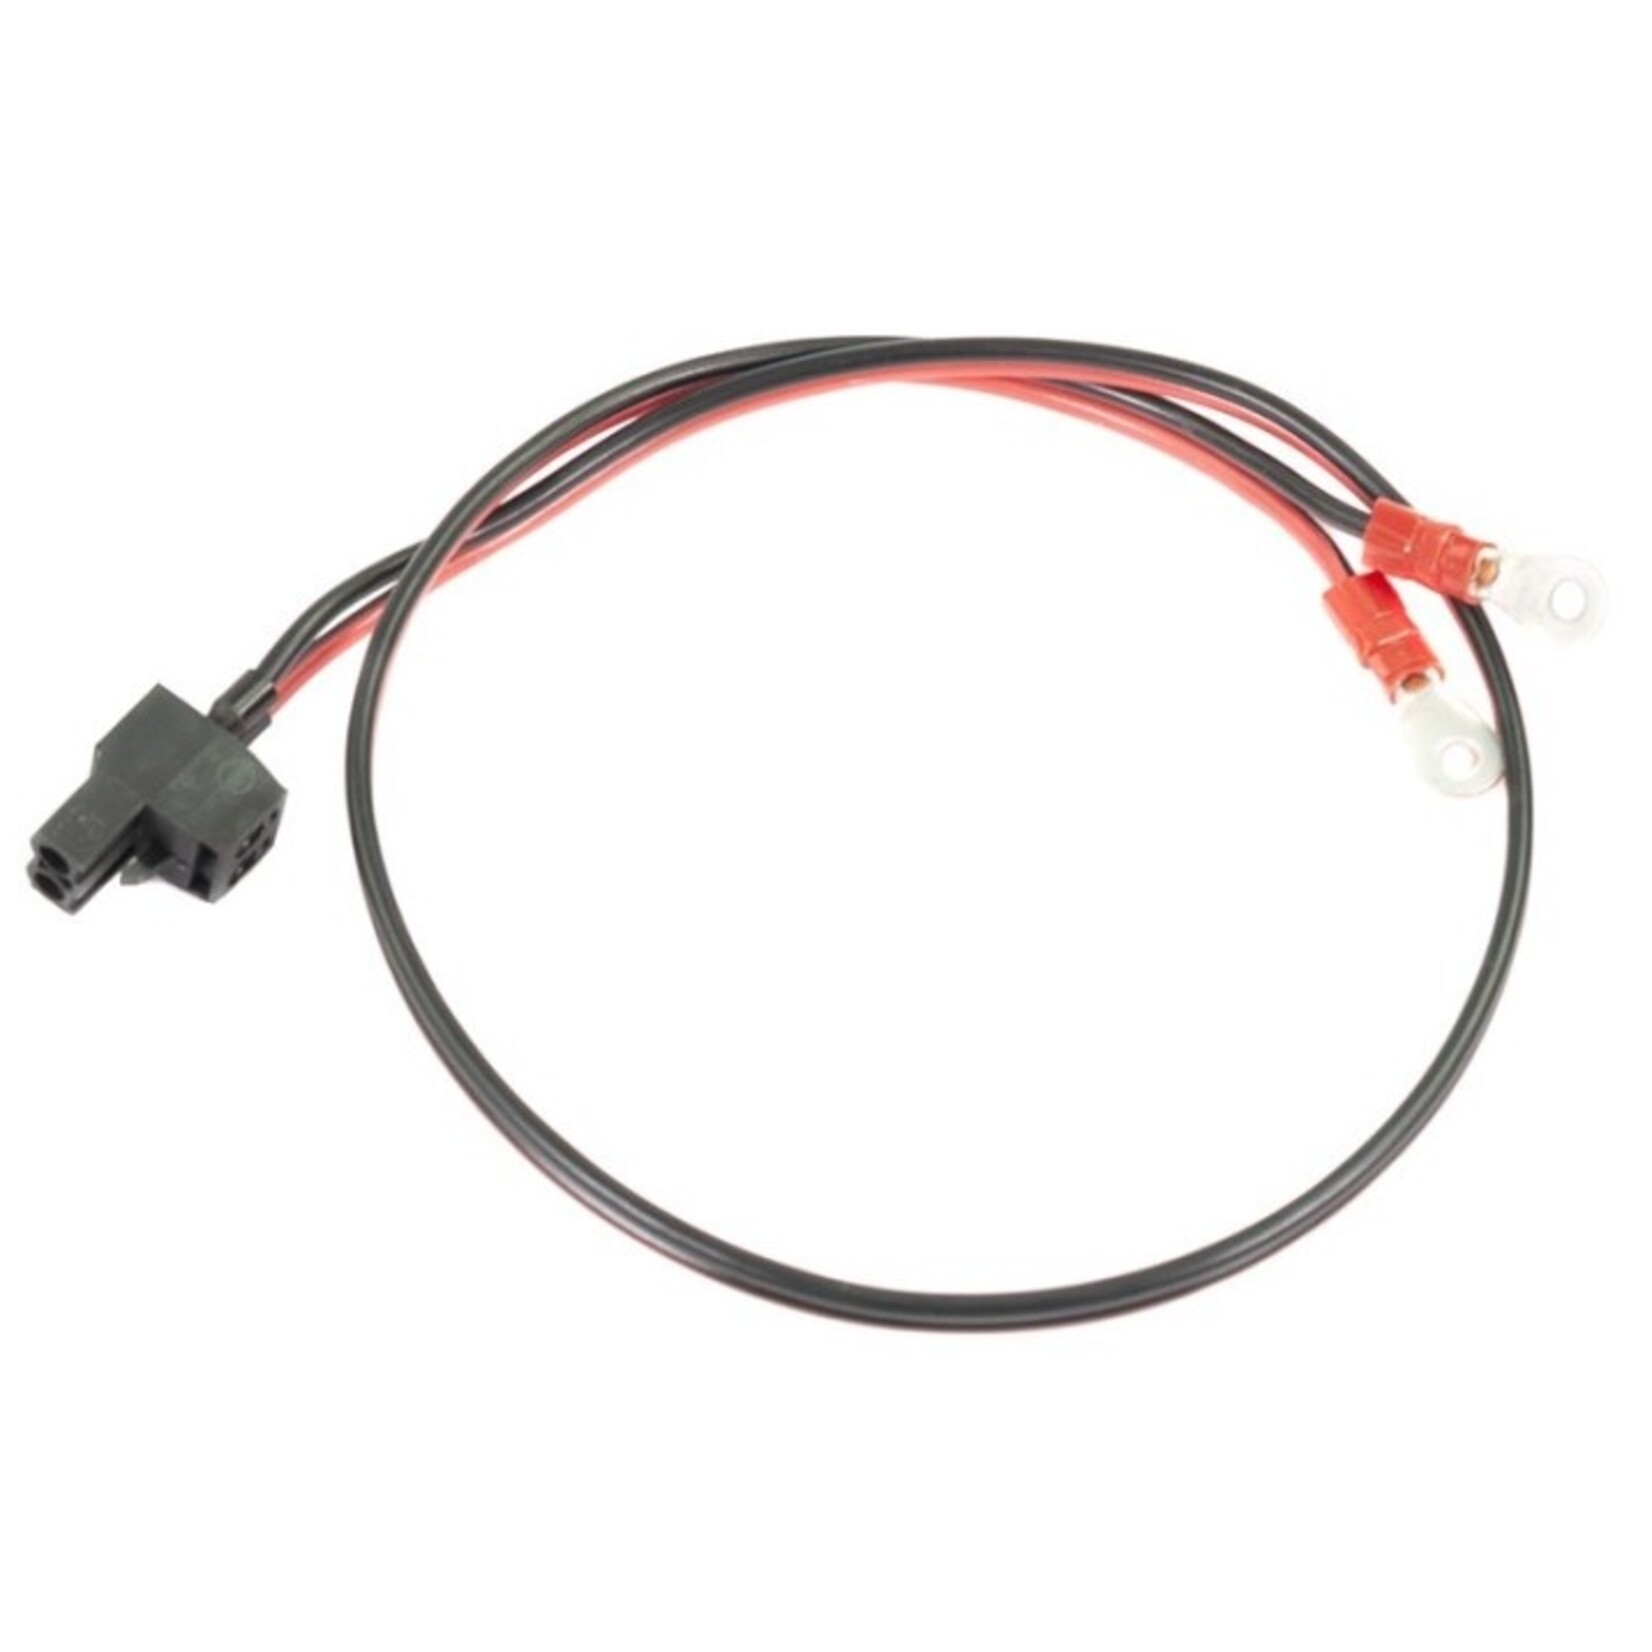 Prusa Research Heatbed-Rambo power cable (screw-attached)